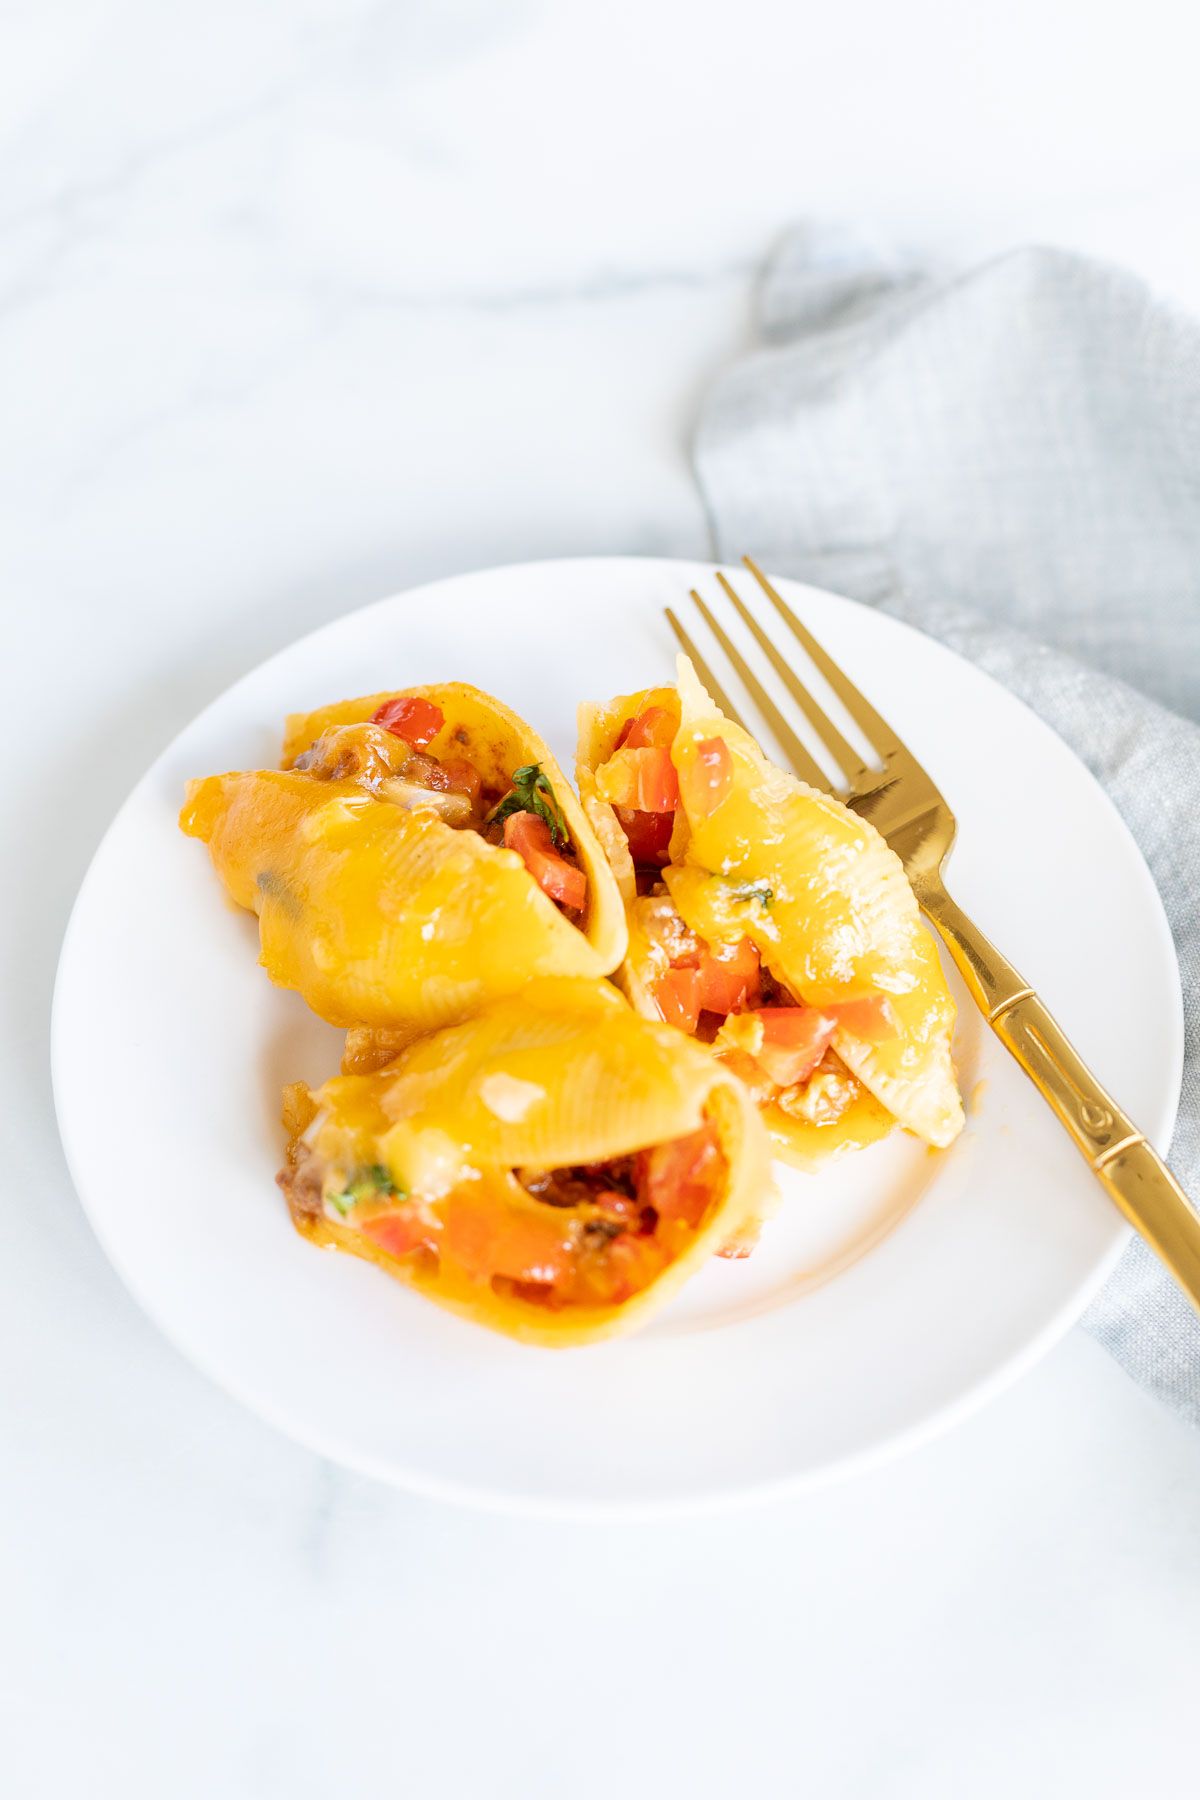 A serving of taco stuffed shells on a white plate with a gold fork.